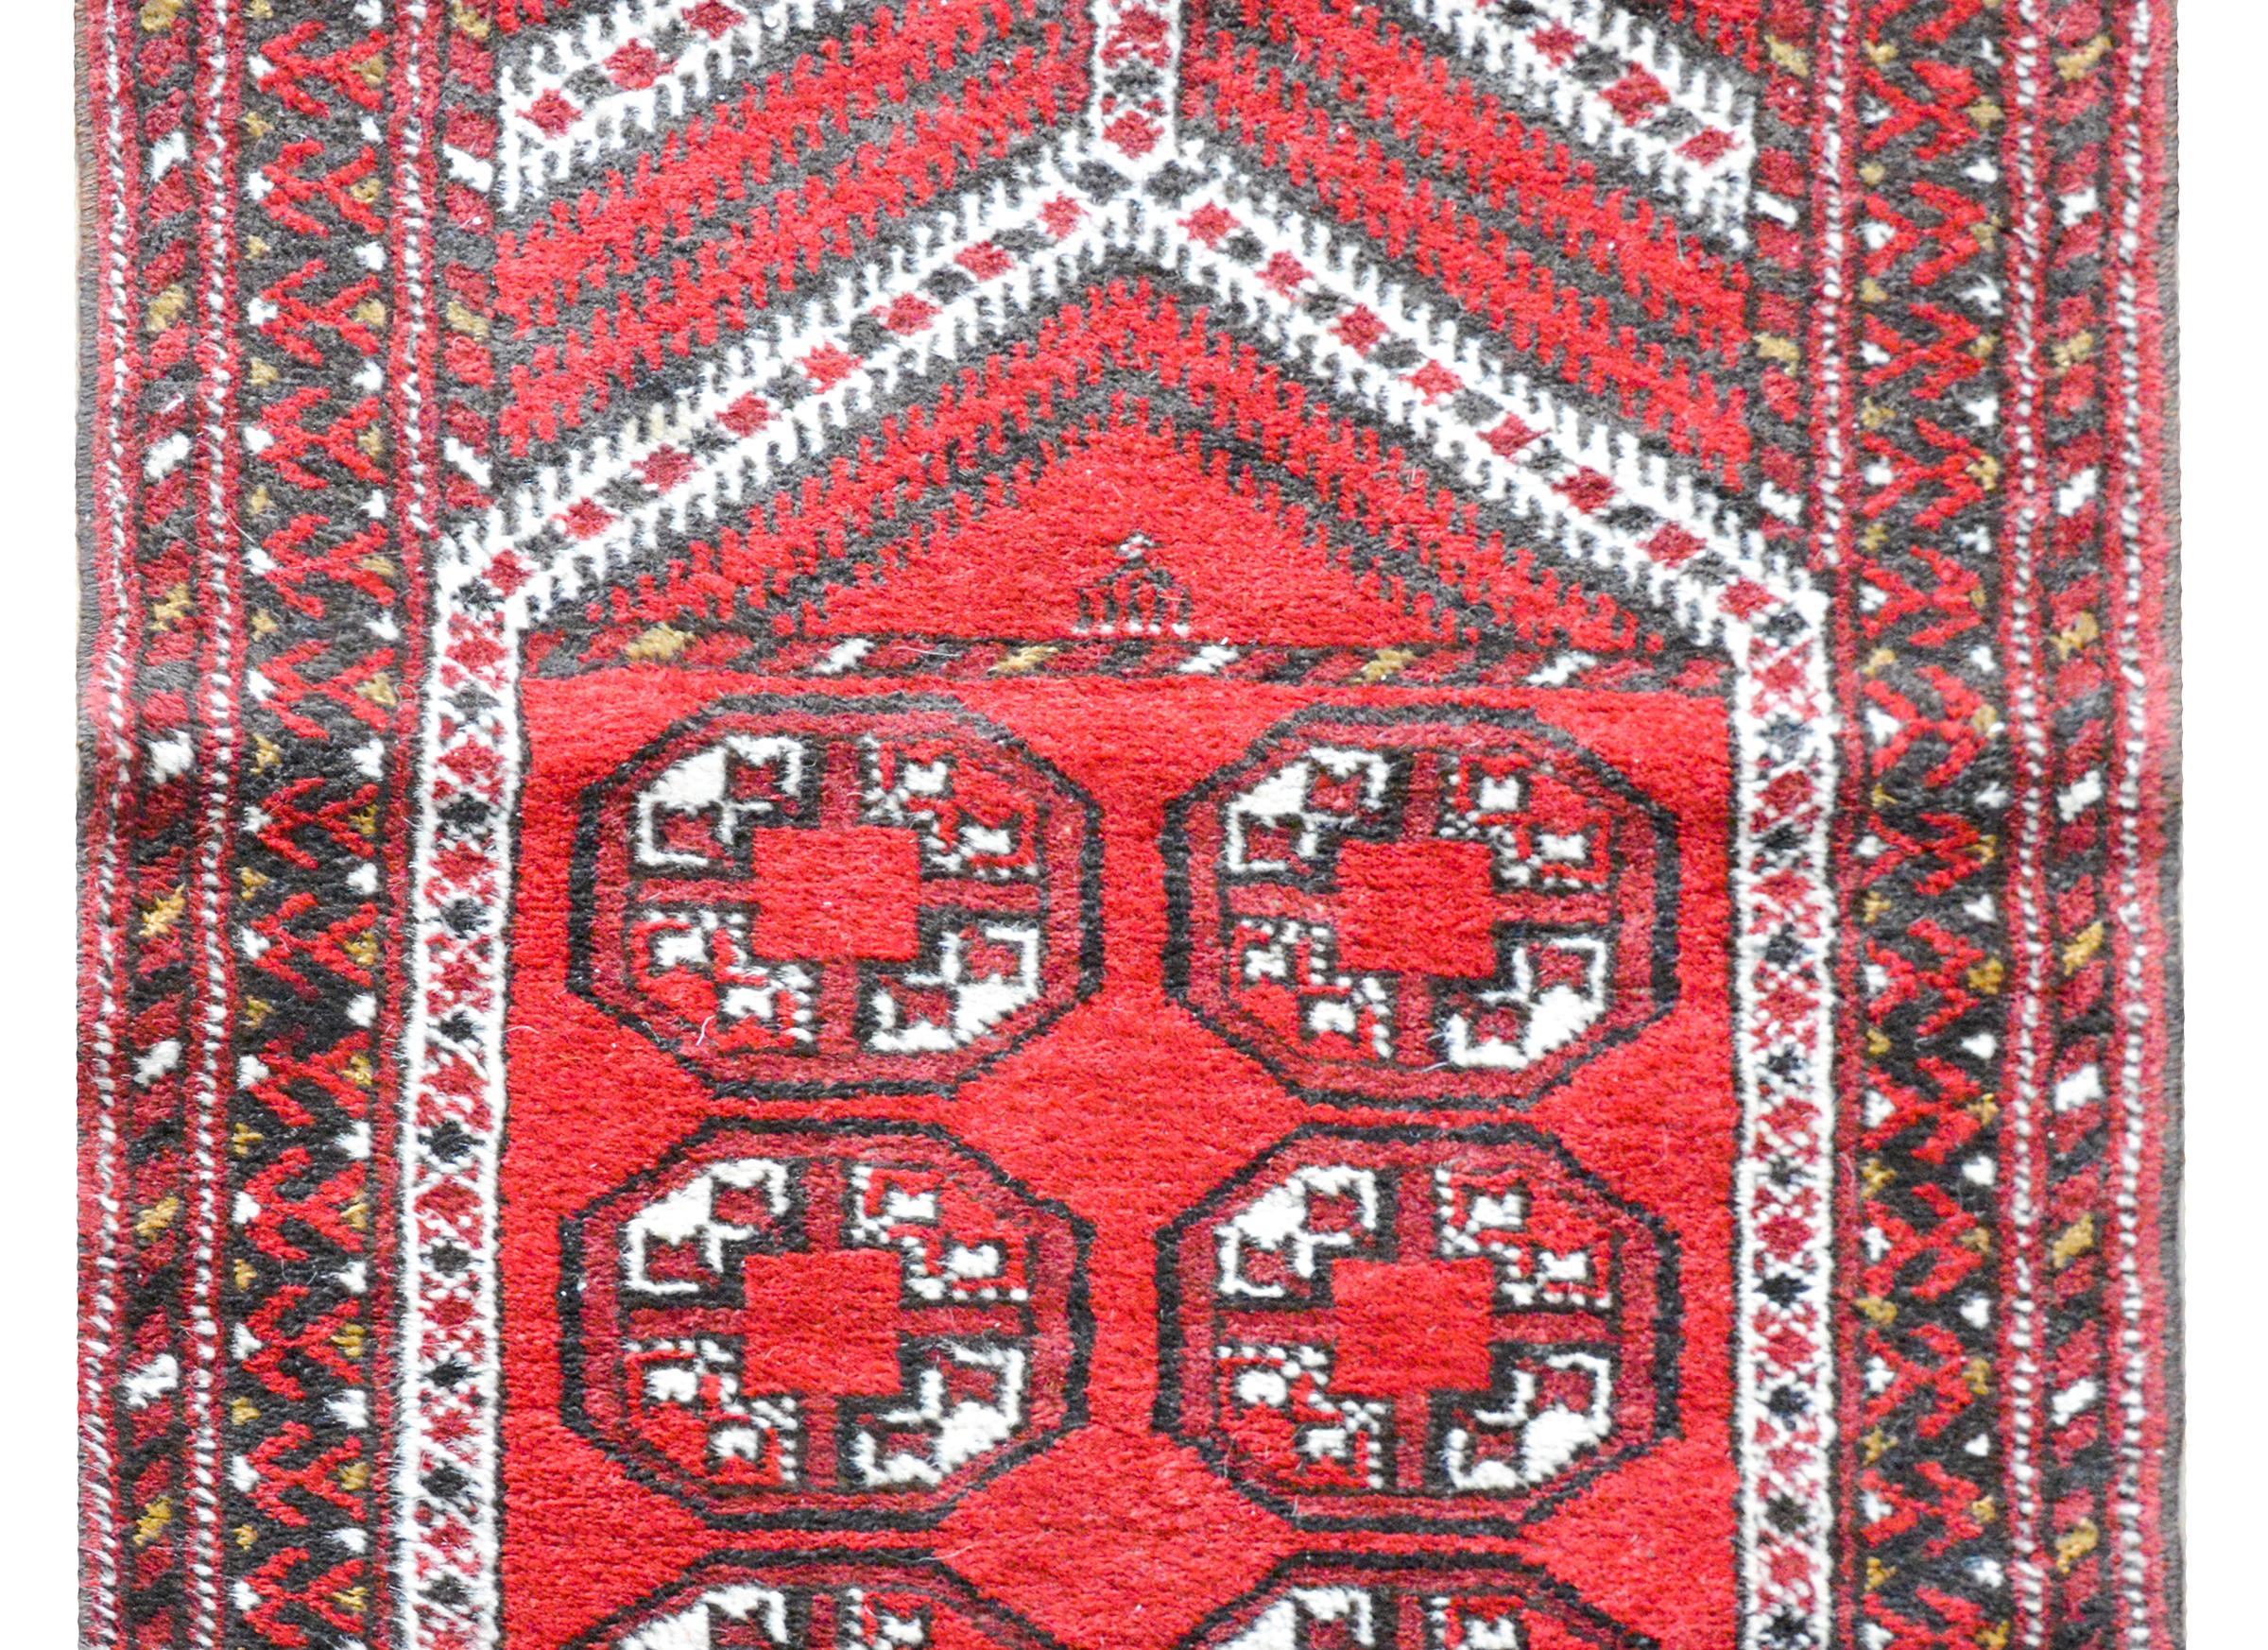 A charming vintage Afghani Turkmen prayer rug with a geometric pattern woven in crimson, black, and white, and surrounded by a border composed with three thin geometric pattered stripes.